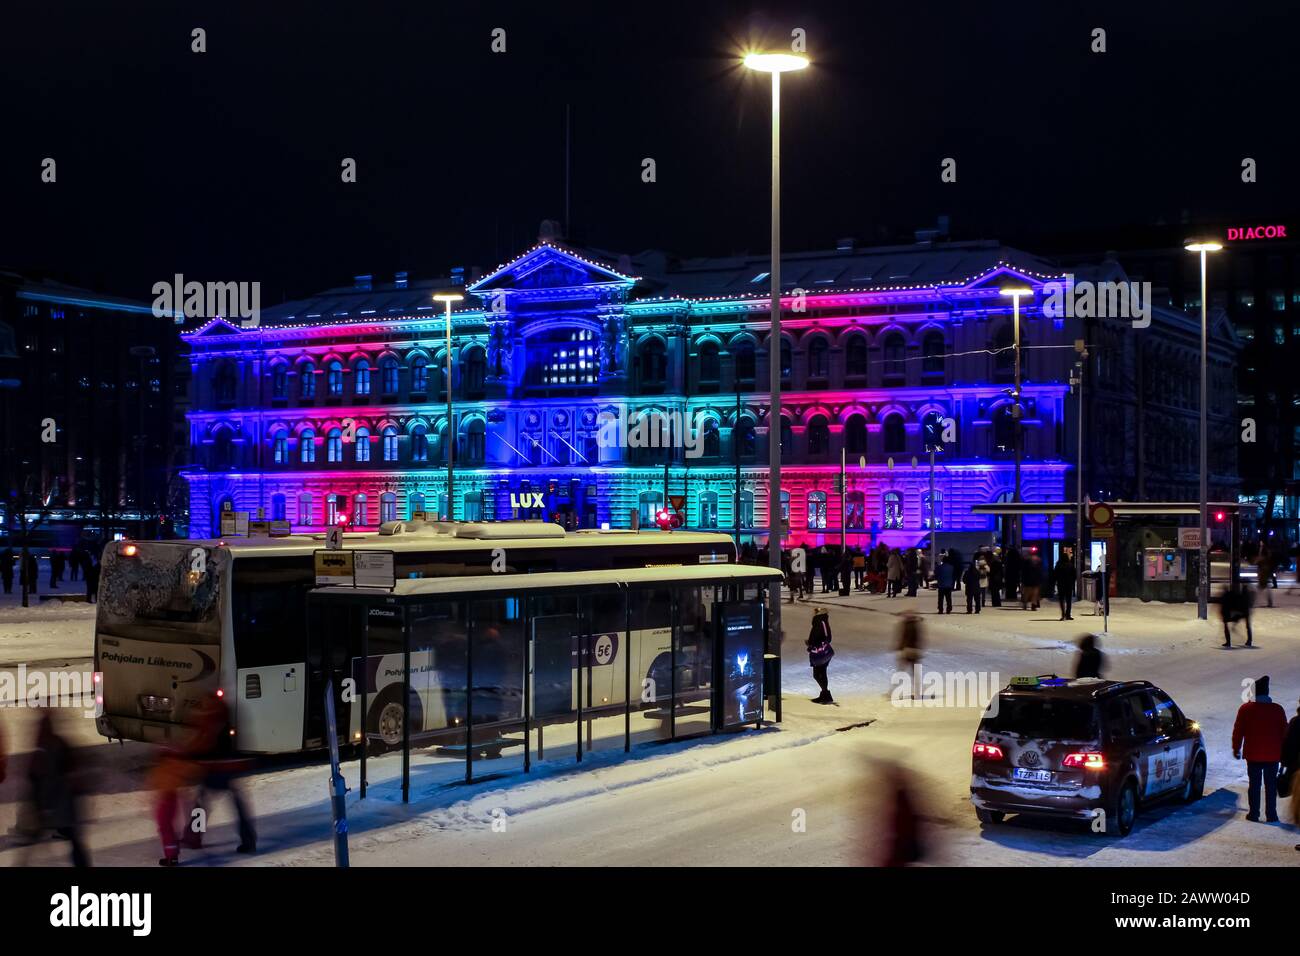 Candy House - a light installation by Sun Effects - on the facade of Ateneum Art Museum during Lux Helsinki Light Art Festival 2016, Finland Stock Photo